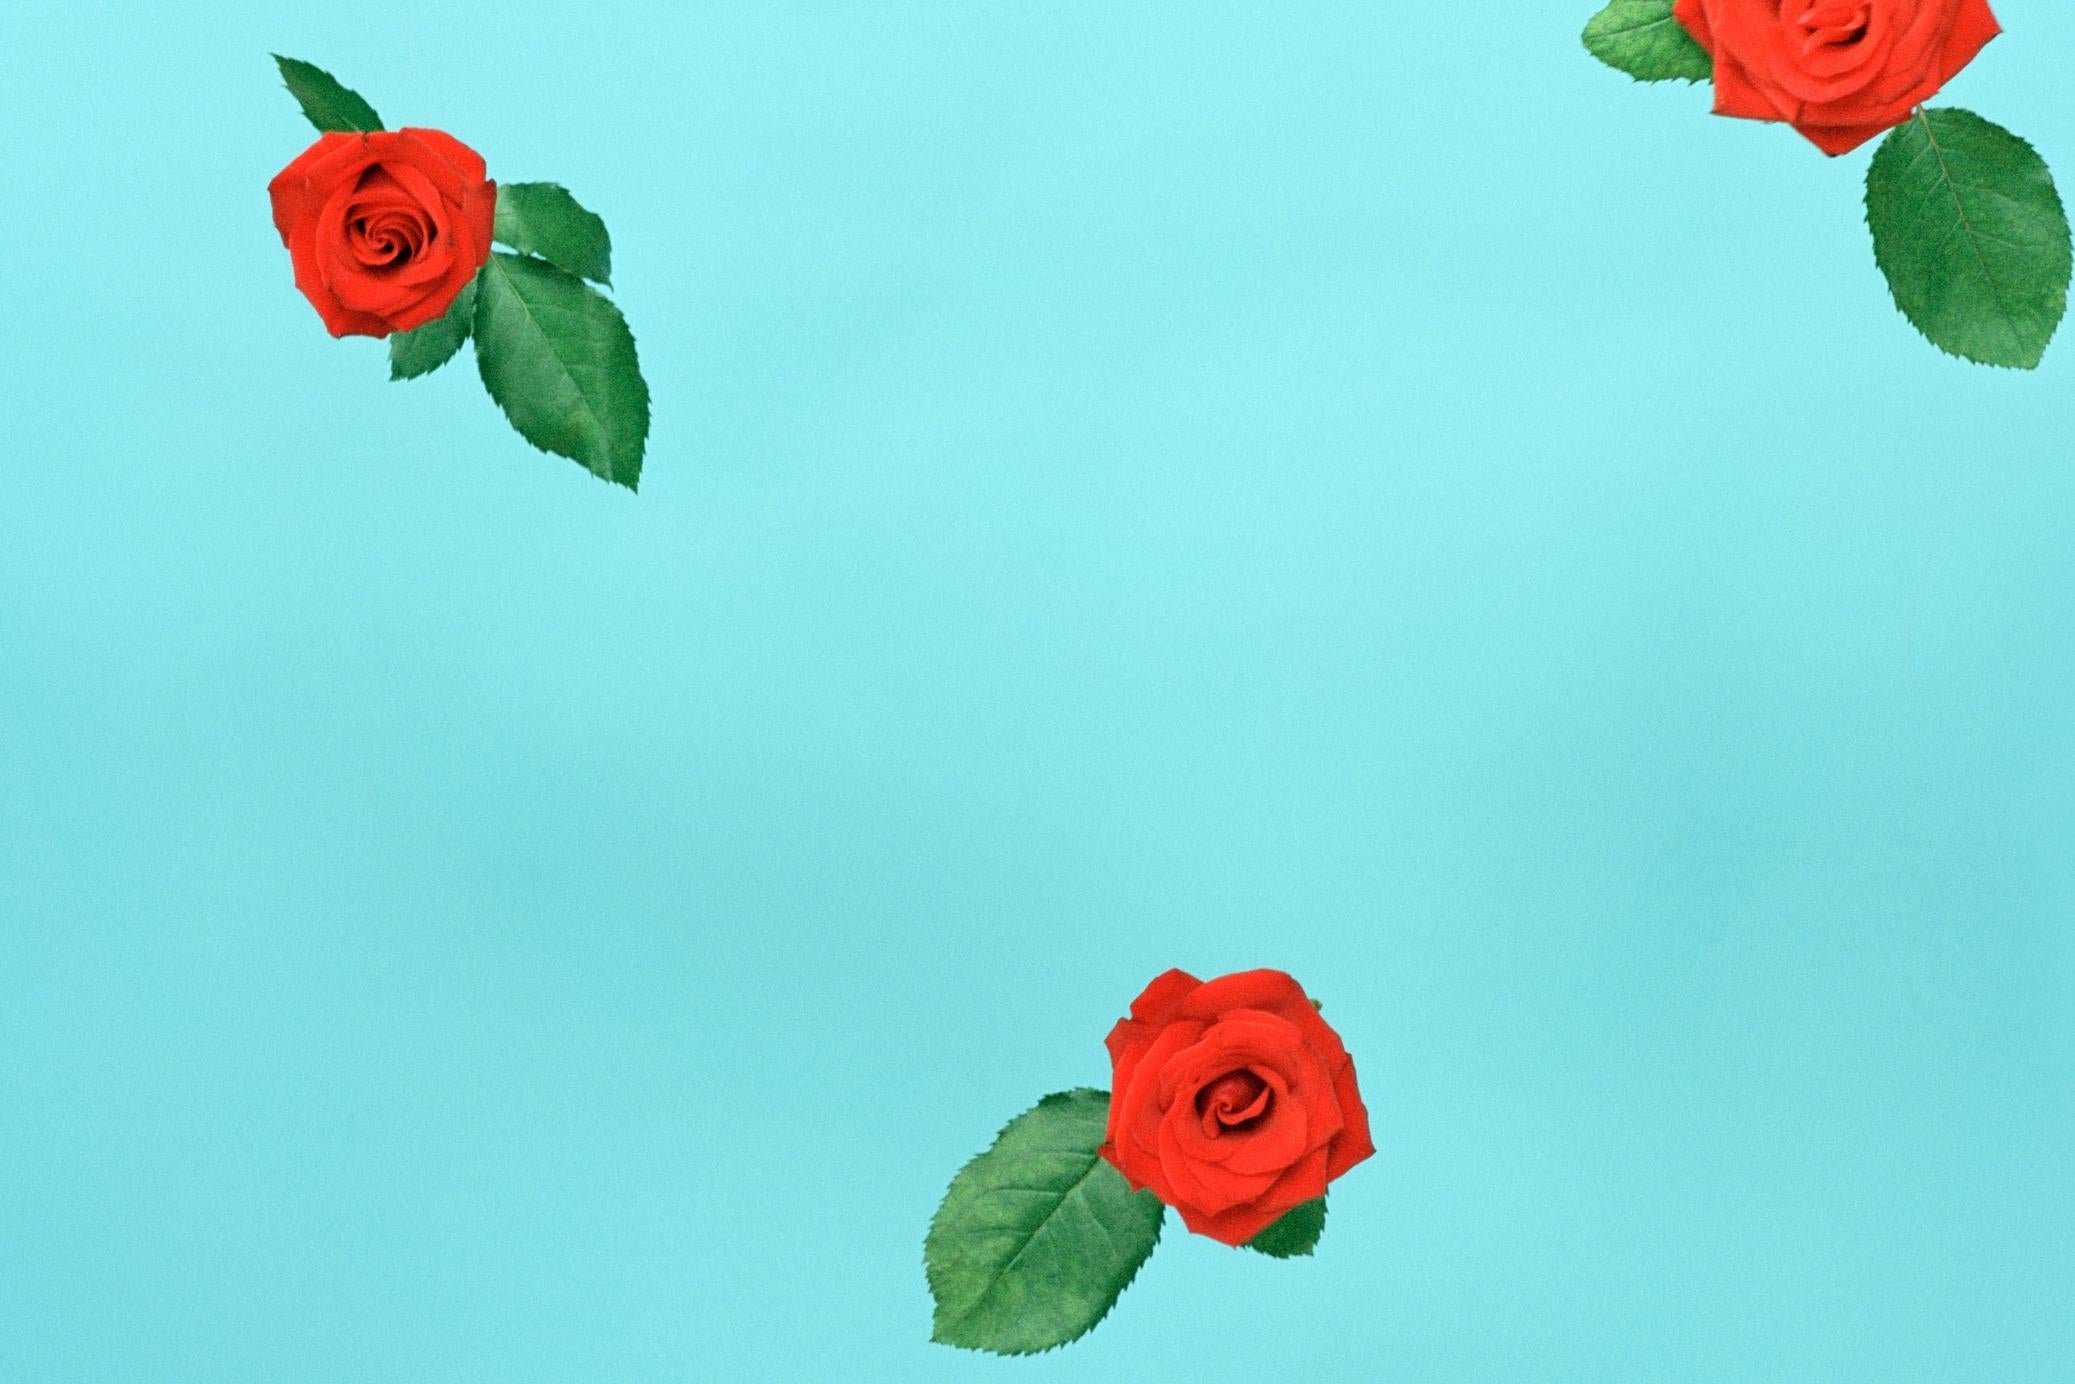 a pattern – Ina Jang, Abstract, Minimalistic, Surrealism, Red Rose, Flowers 2